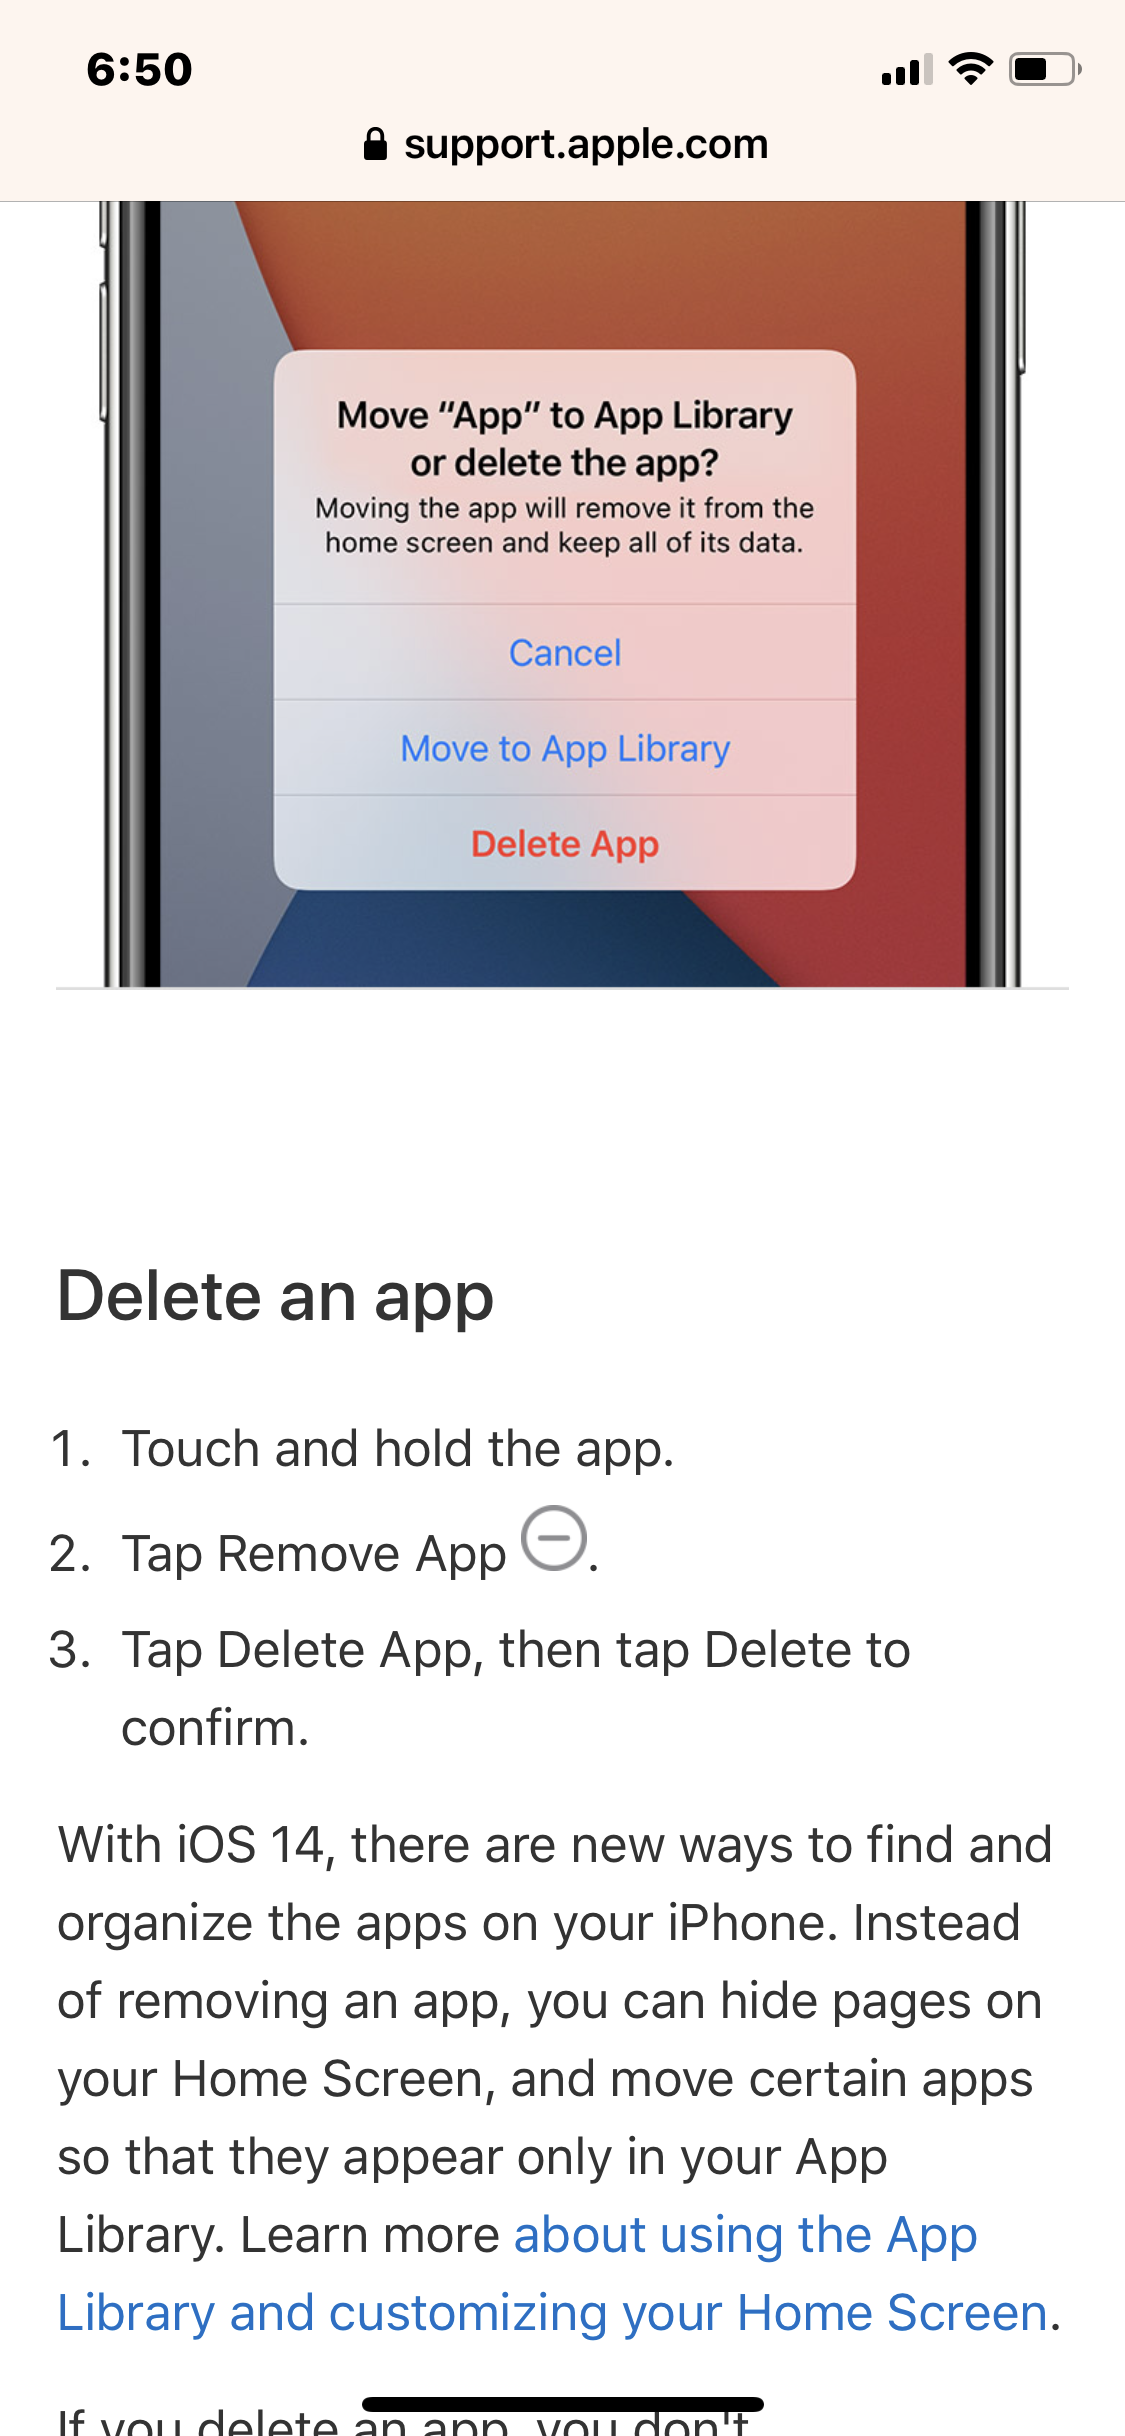 Why don't i have the delete app option?